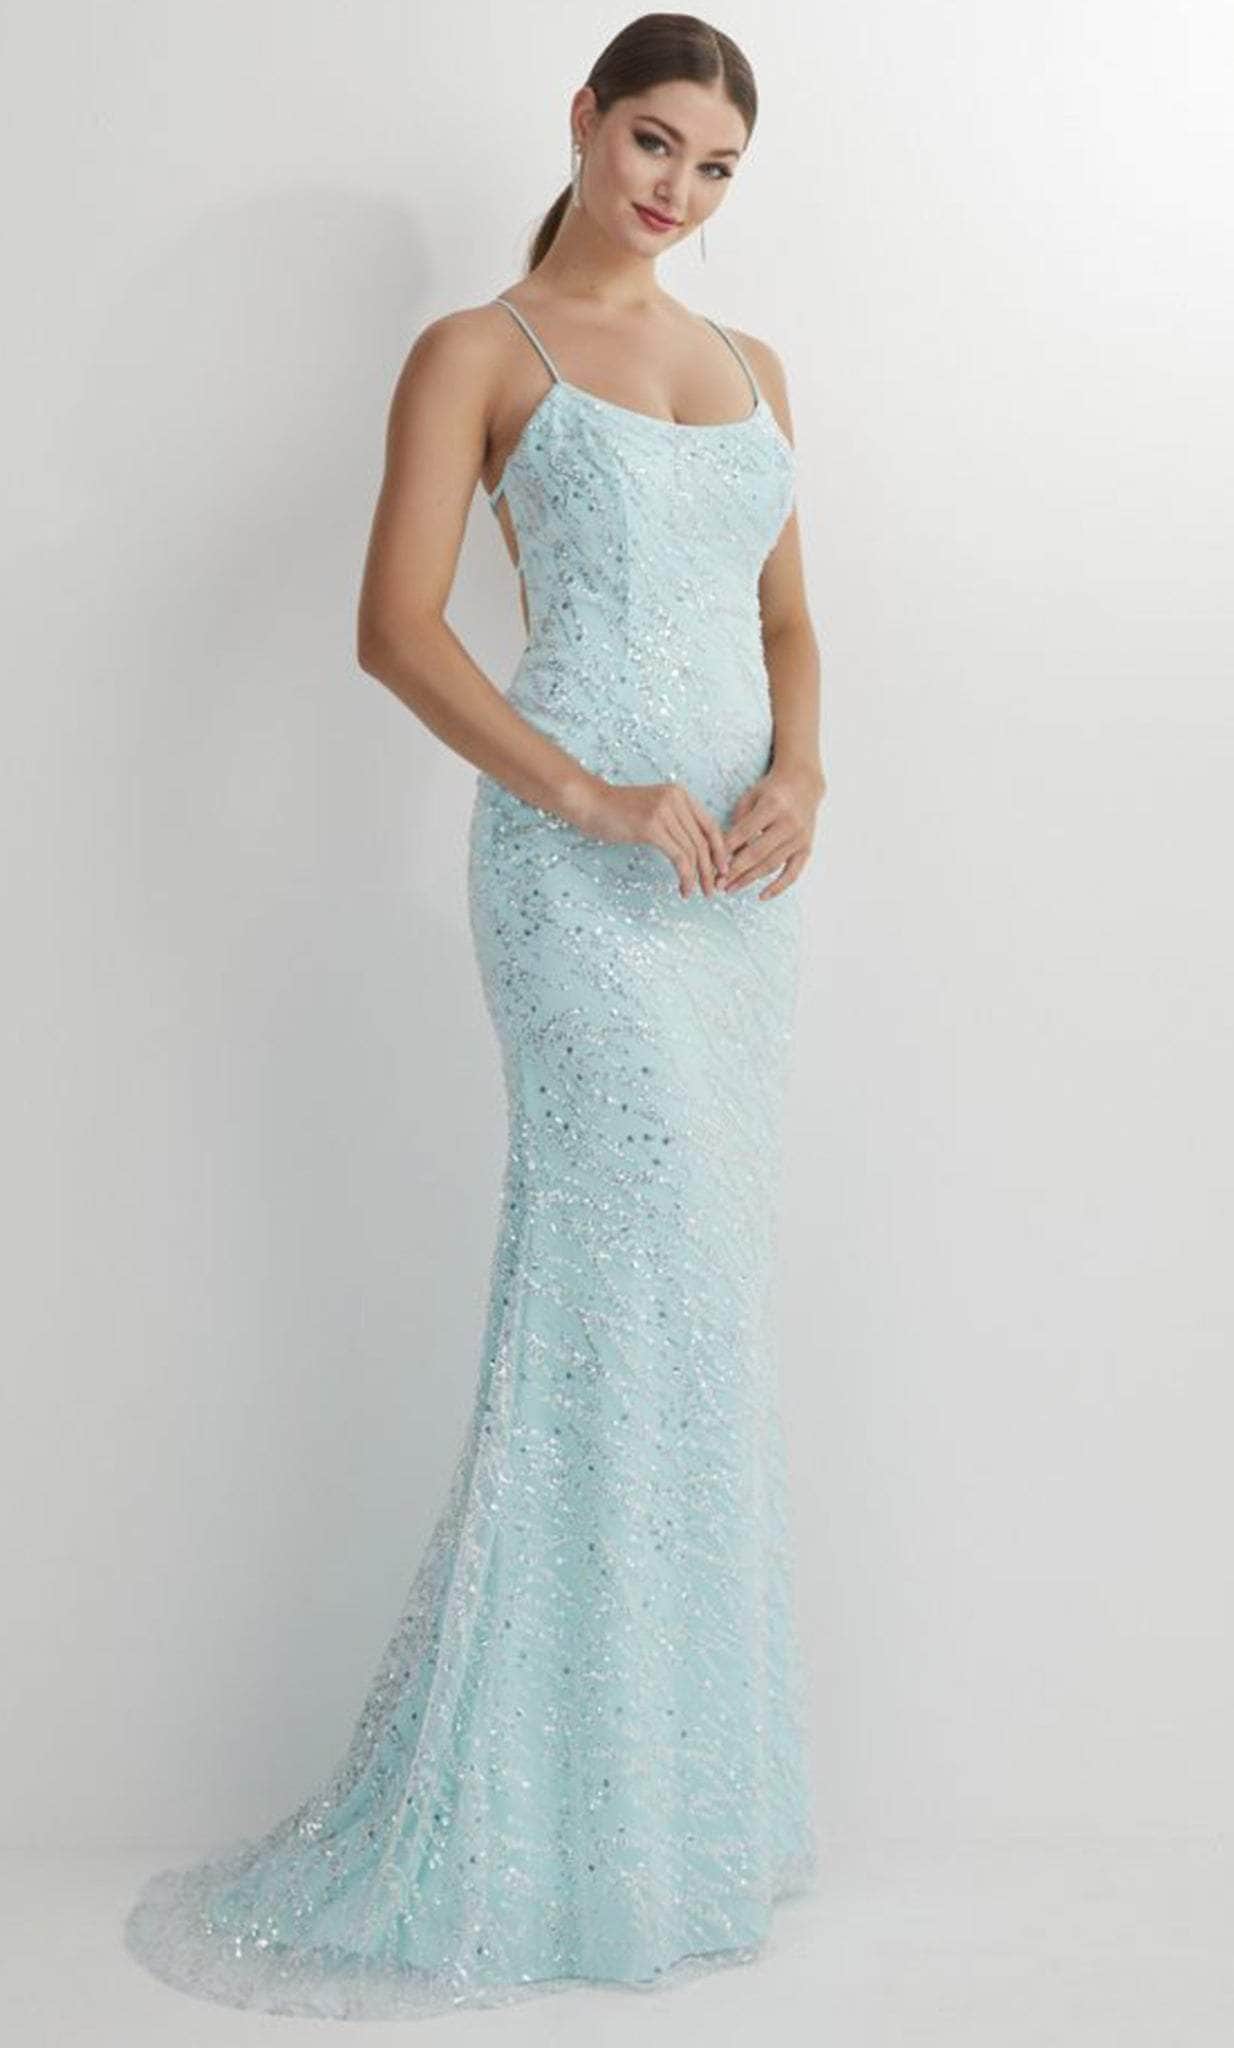 Studio 17, Studio 17 Prom 12893 - Scoop Neck Lace-Up Back Prom Gown